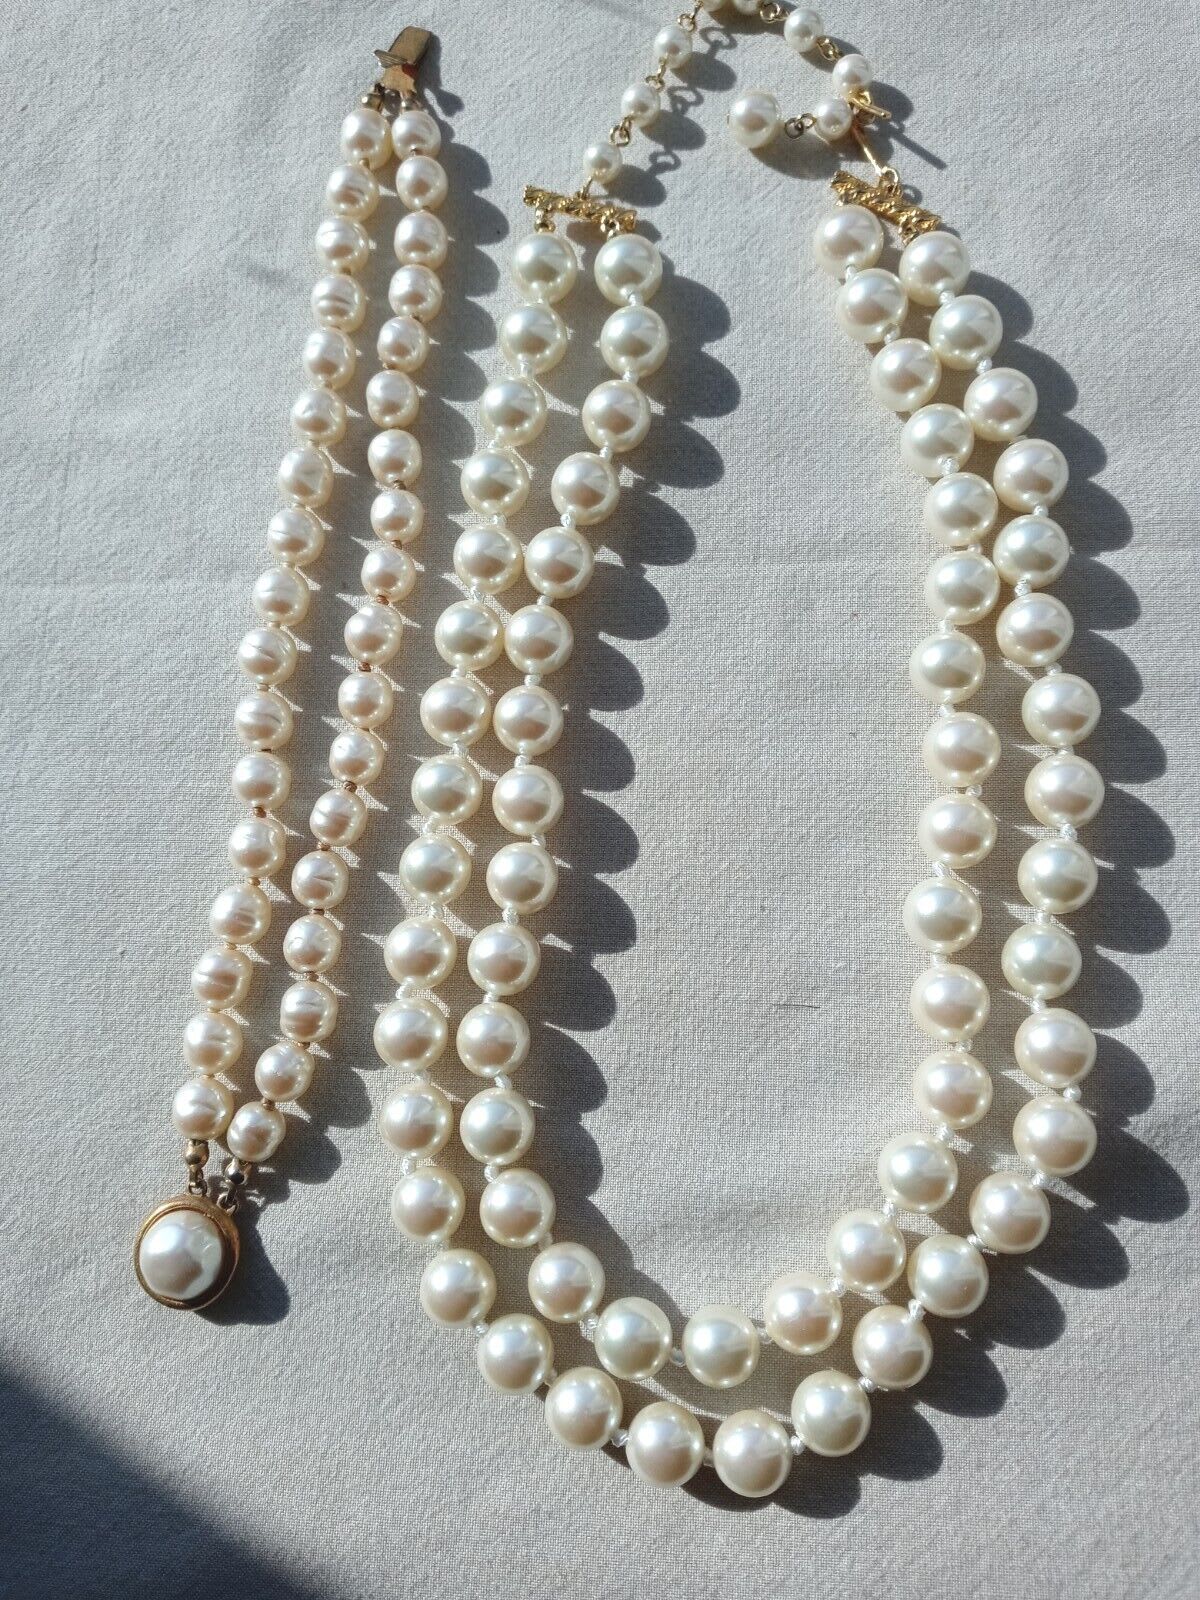 Womens Fine Faux Pearls Necklace - GEMSTONES, PEARLS and CRYSTALS